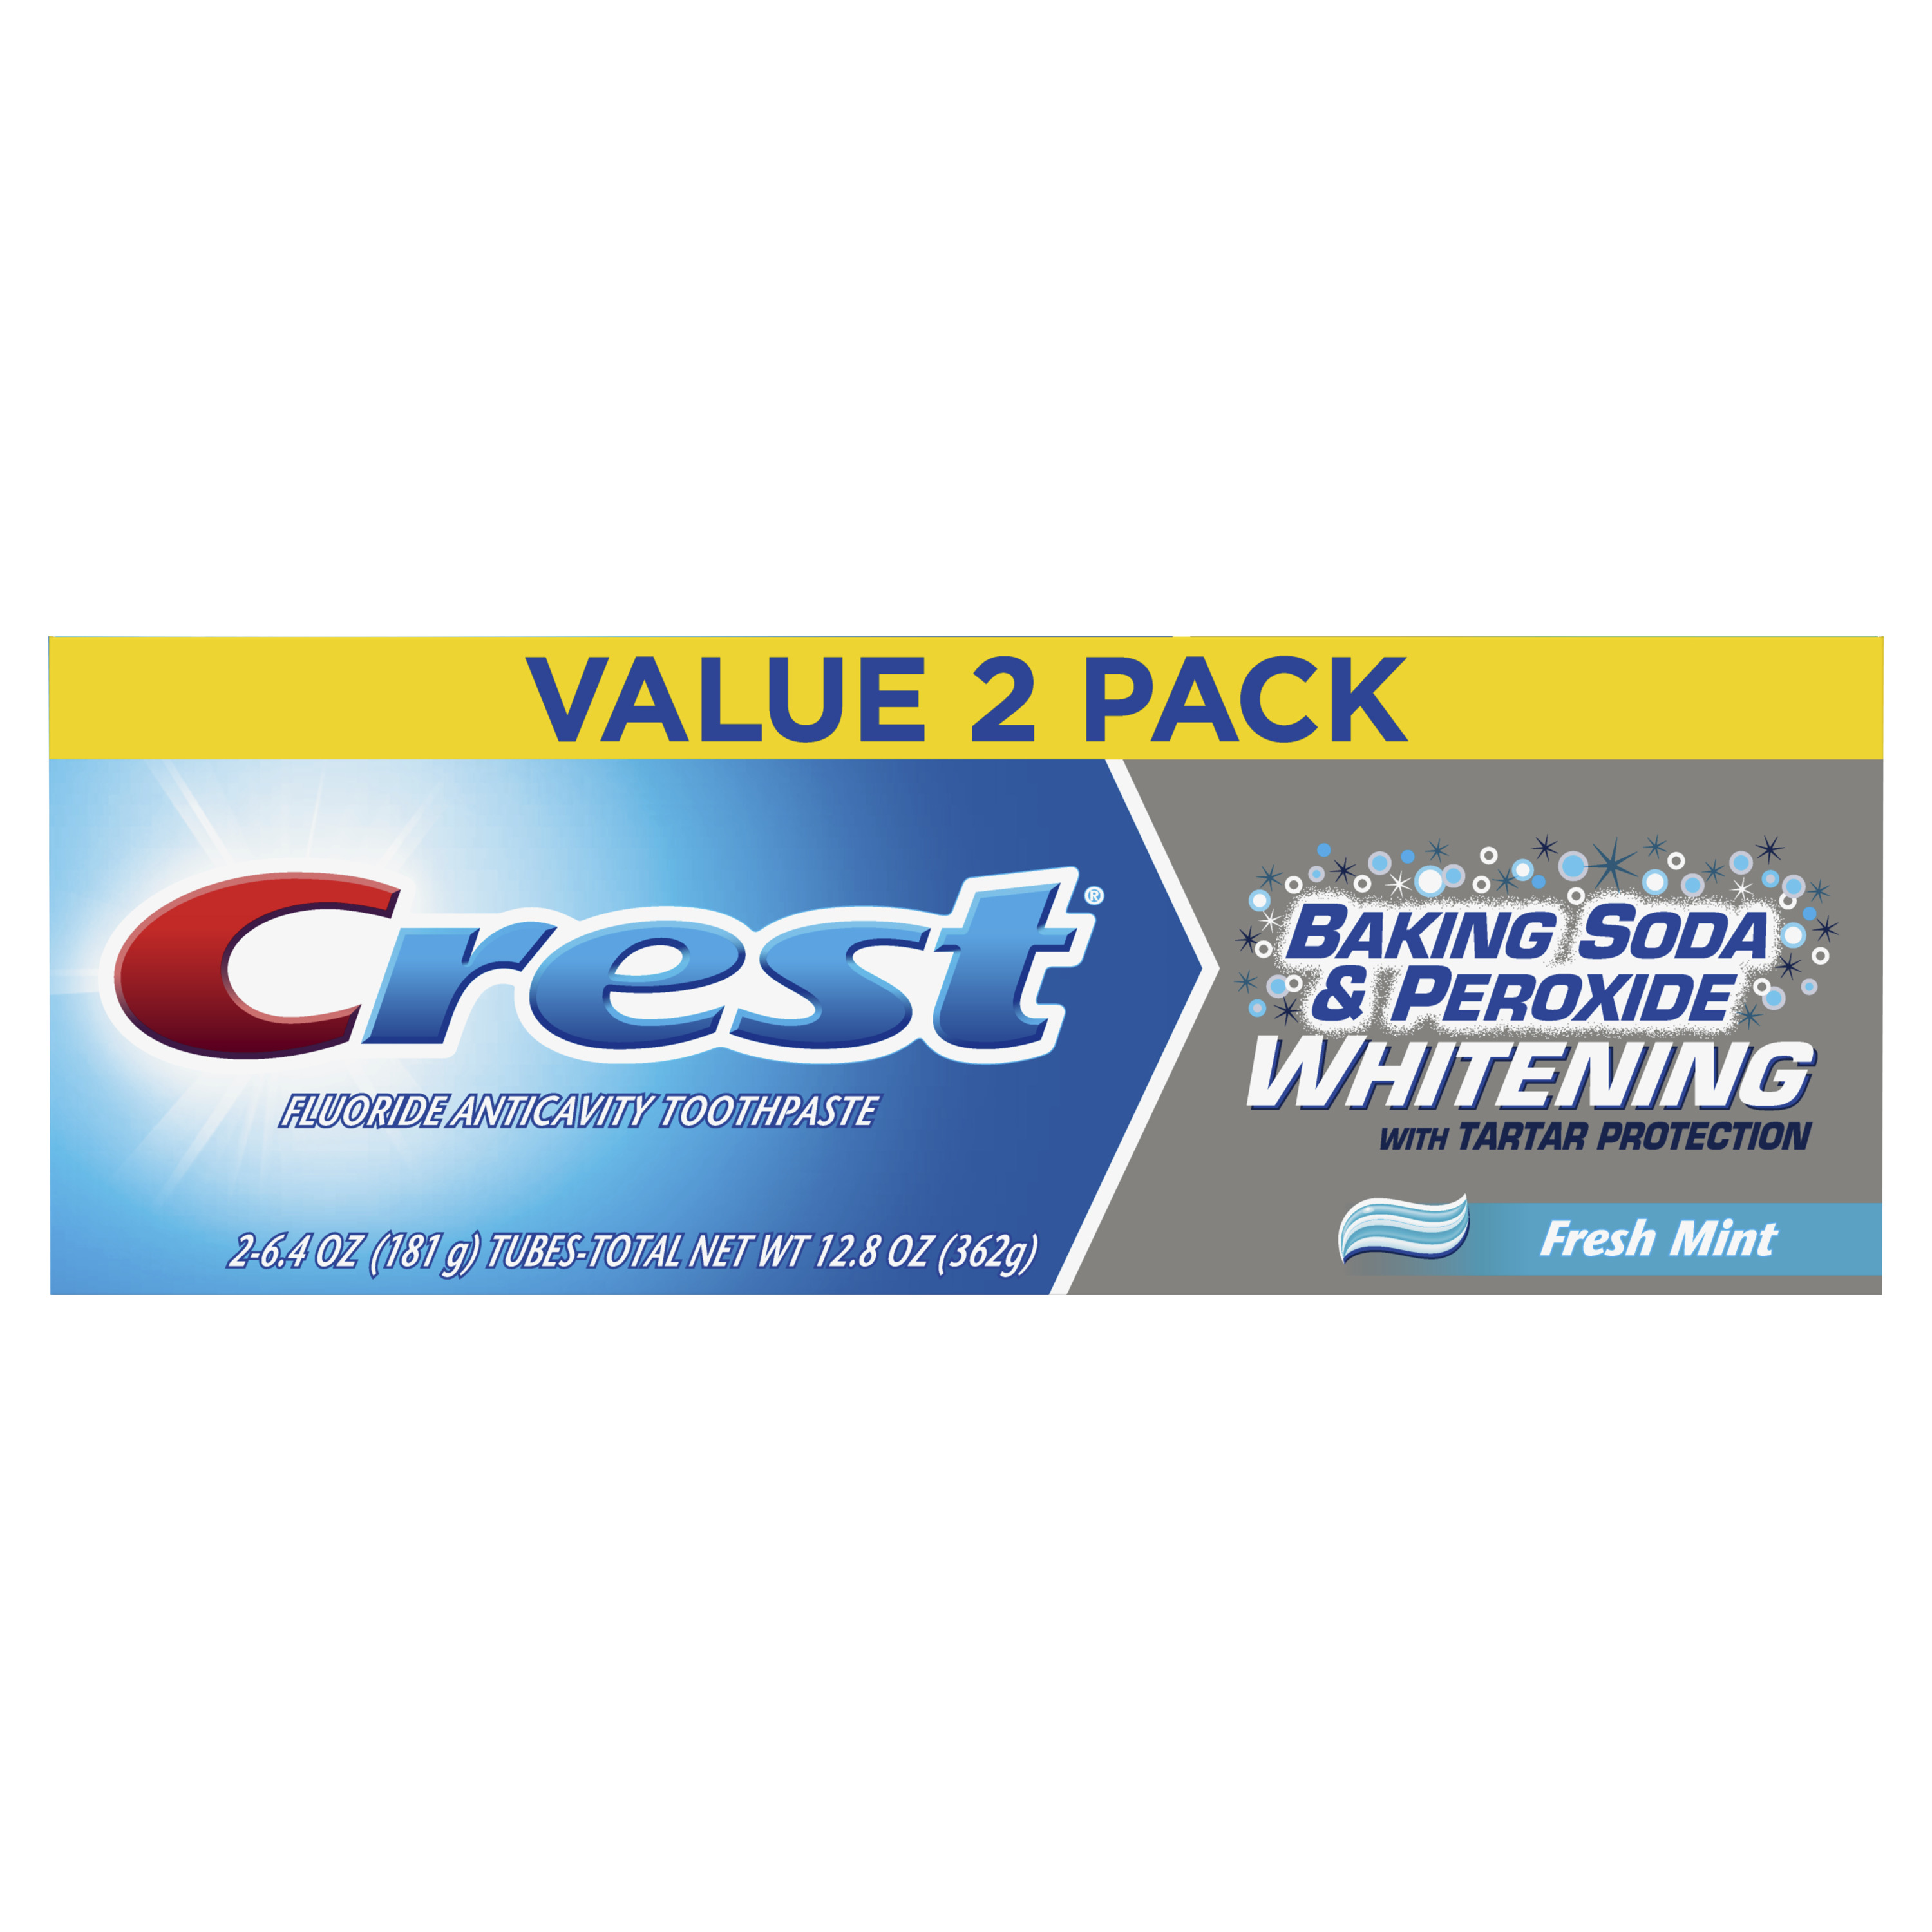 Crest Baking Soda & Peroxide Whitening with Tartar Protection Toothpaste, Fresh Mint, 6.4 oz., Pack of 2 - image 1 of 3